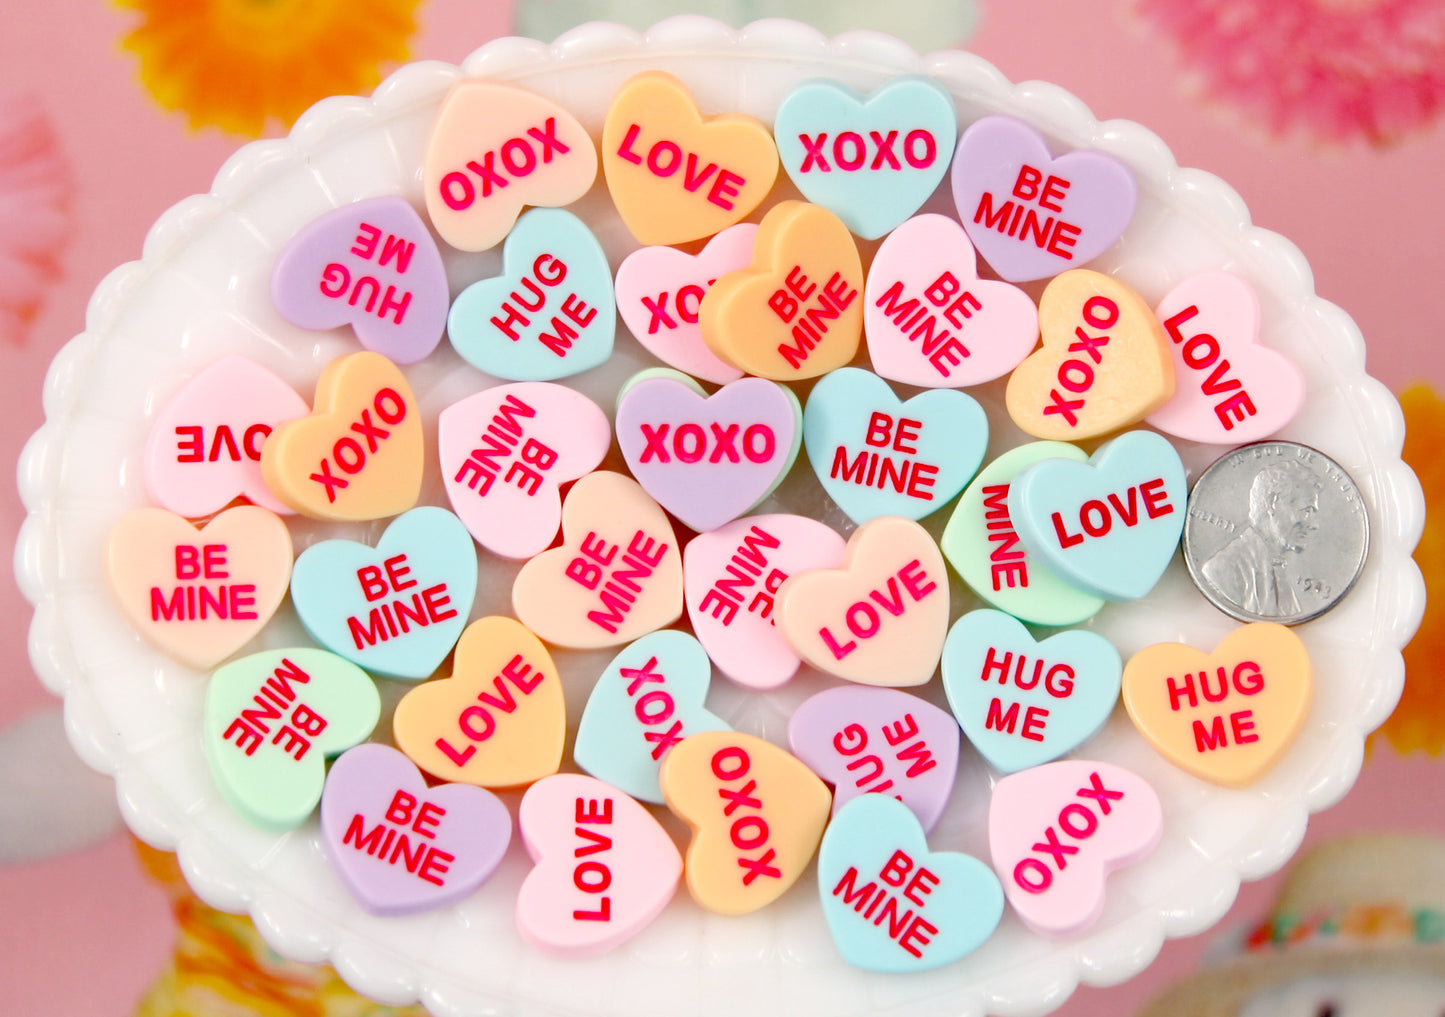 New Pitches for Candy Conversation Hearts